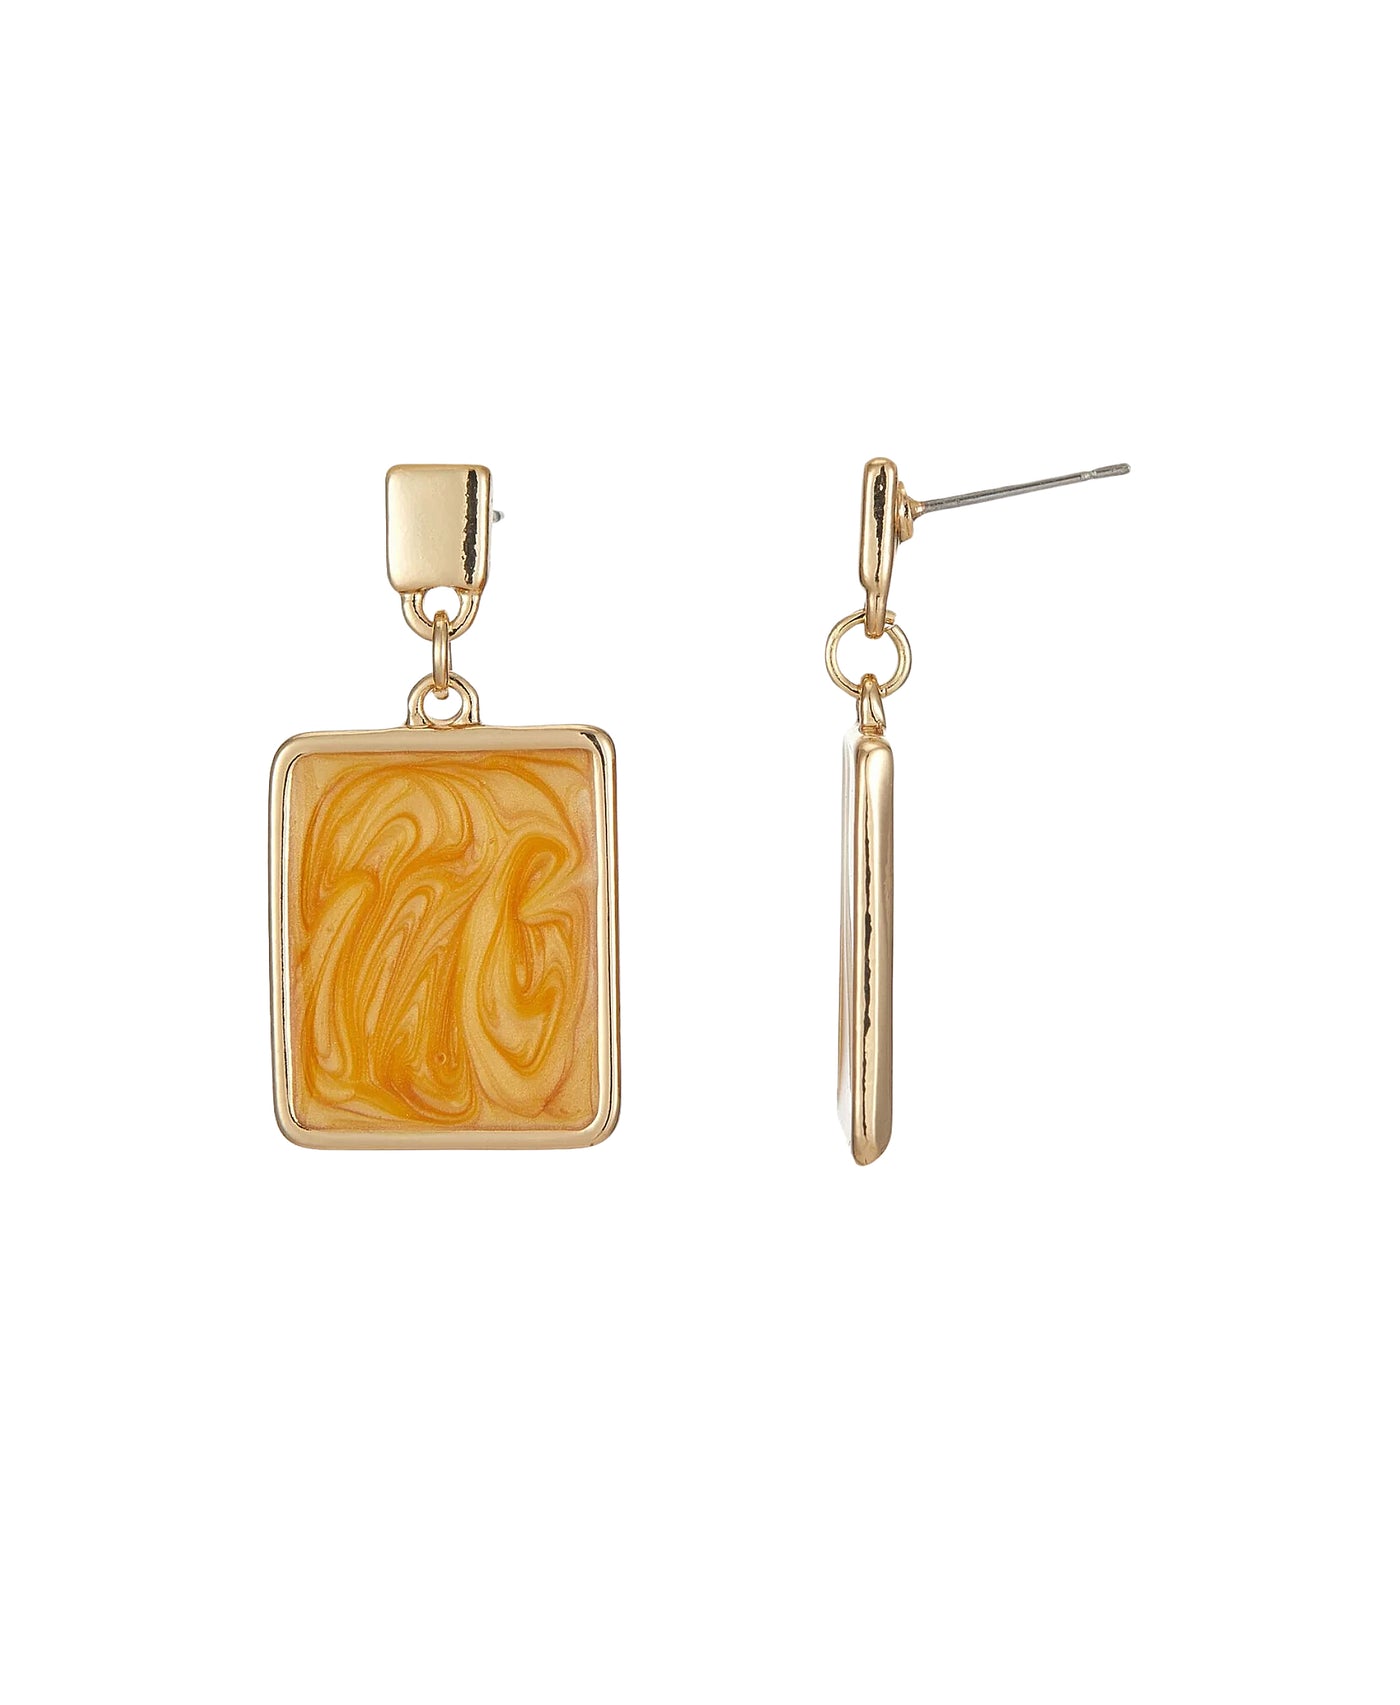 Square Earrings w/ Abstract Design image 1